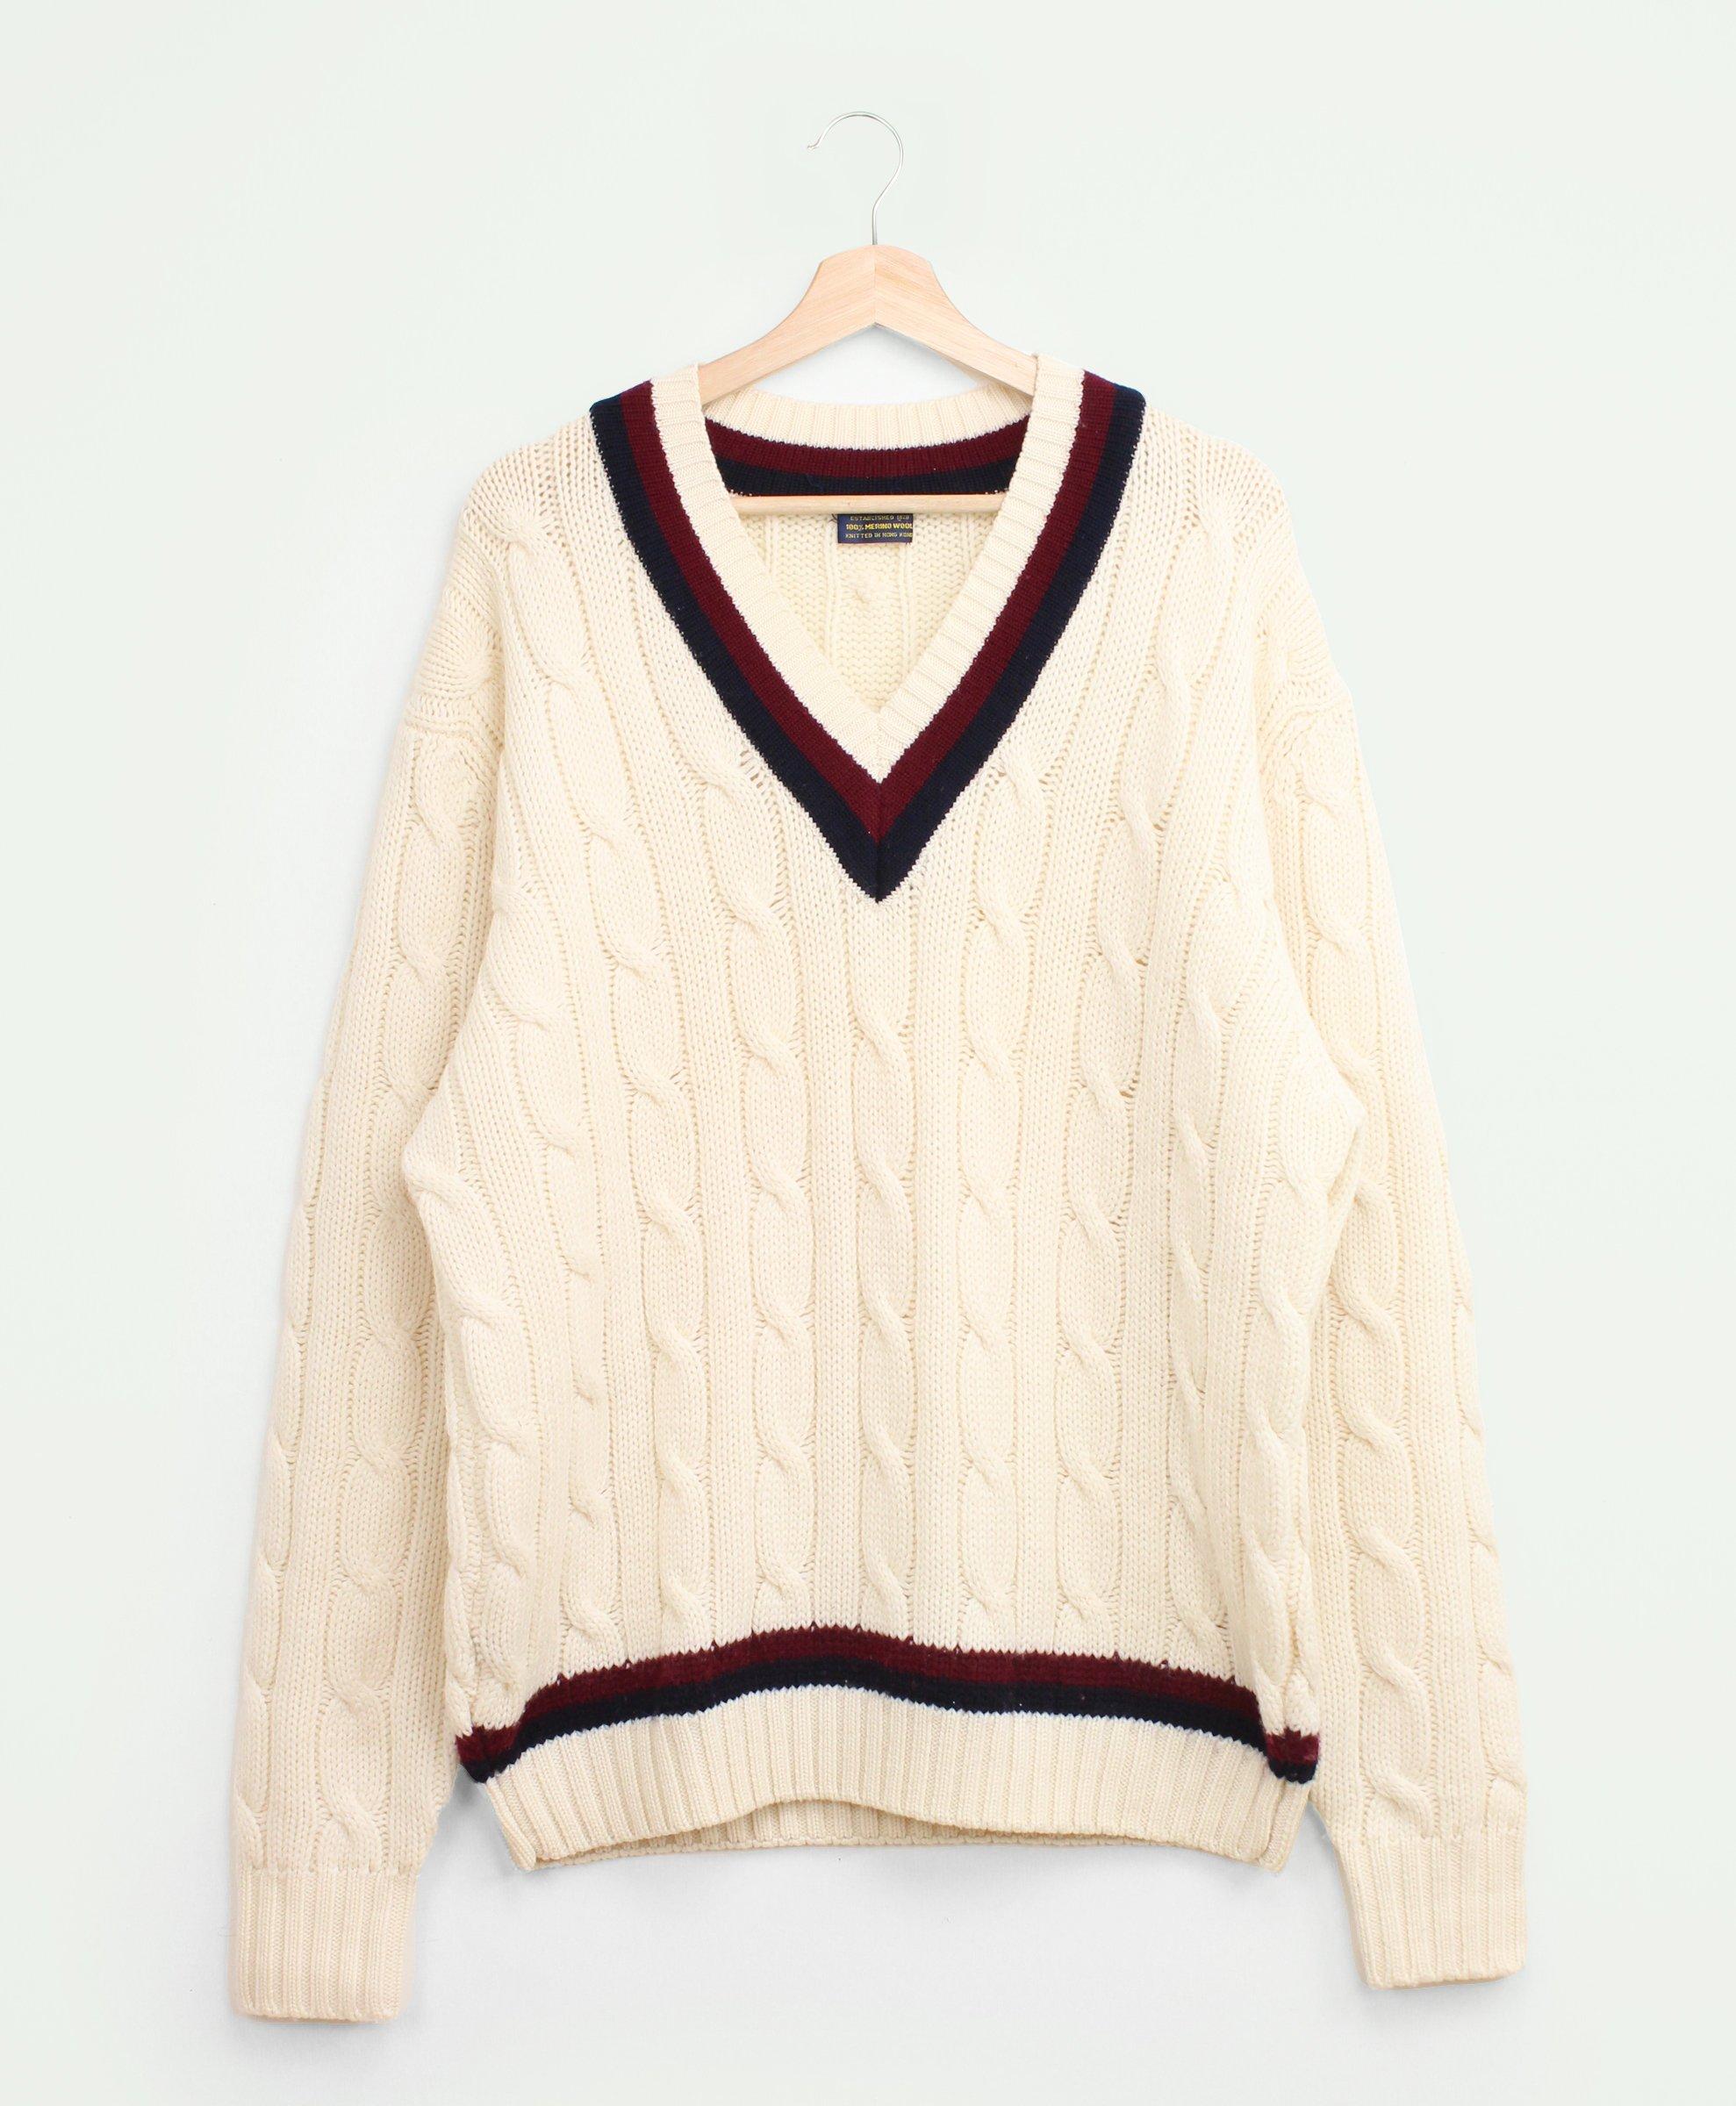 Vintage Merino Wool Cable Knit Tennis Sweater, 1990s, XL